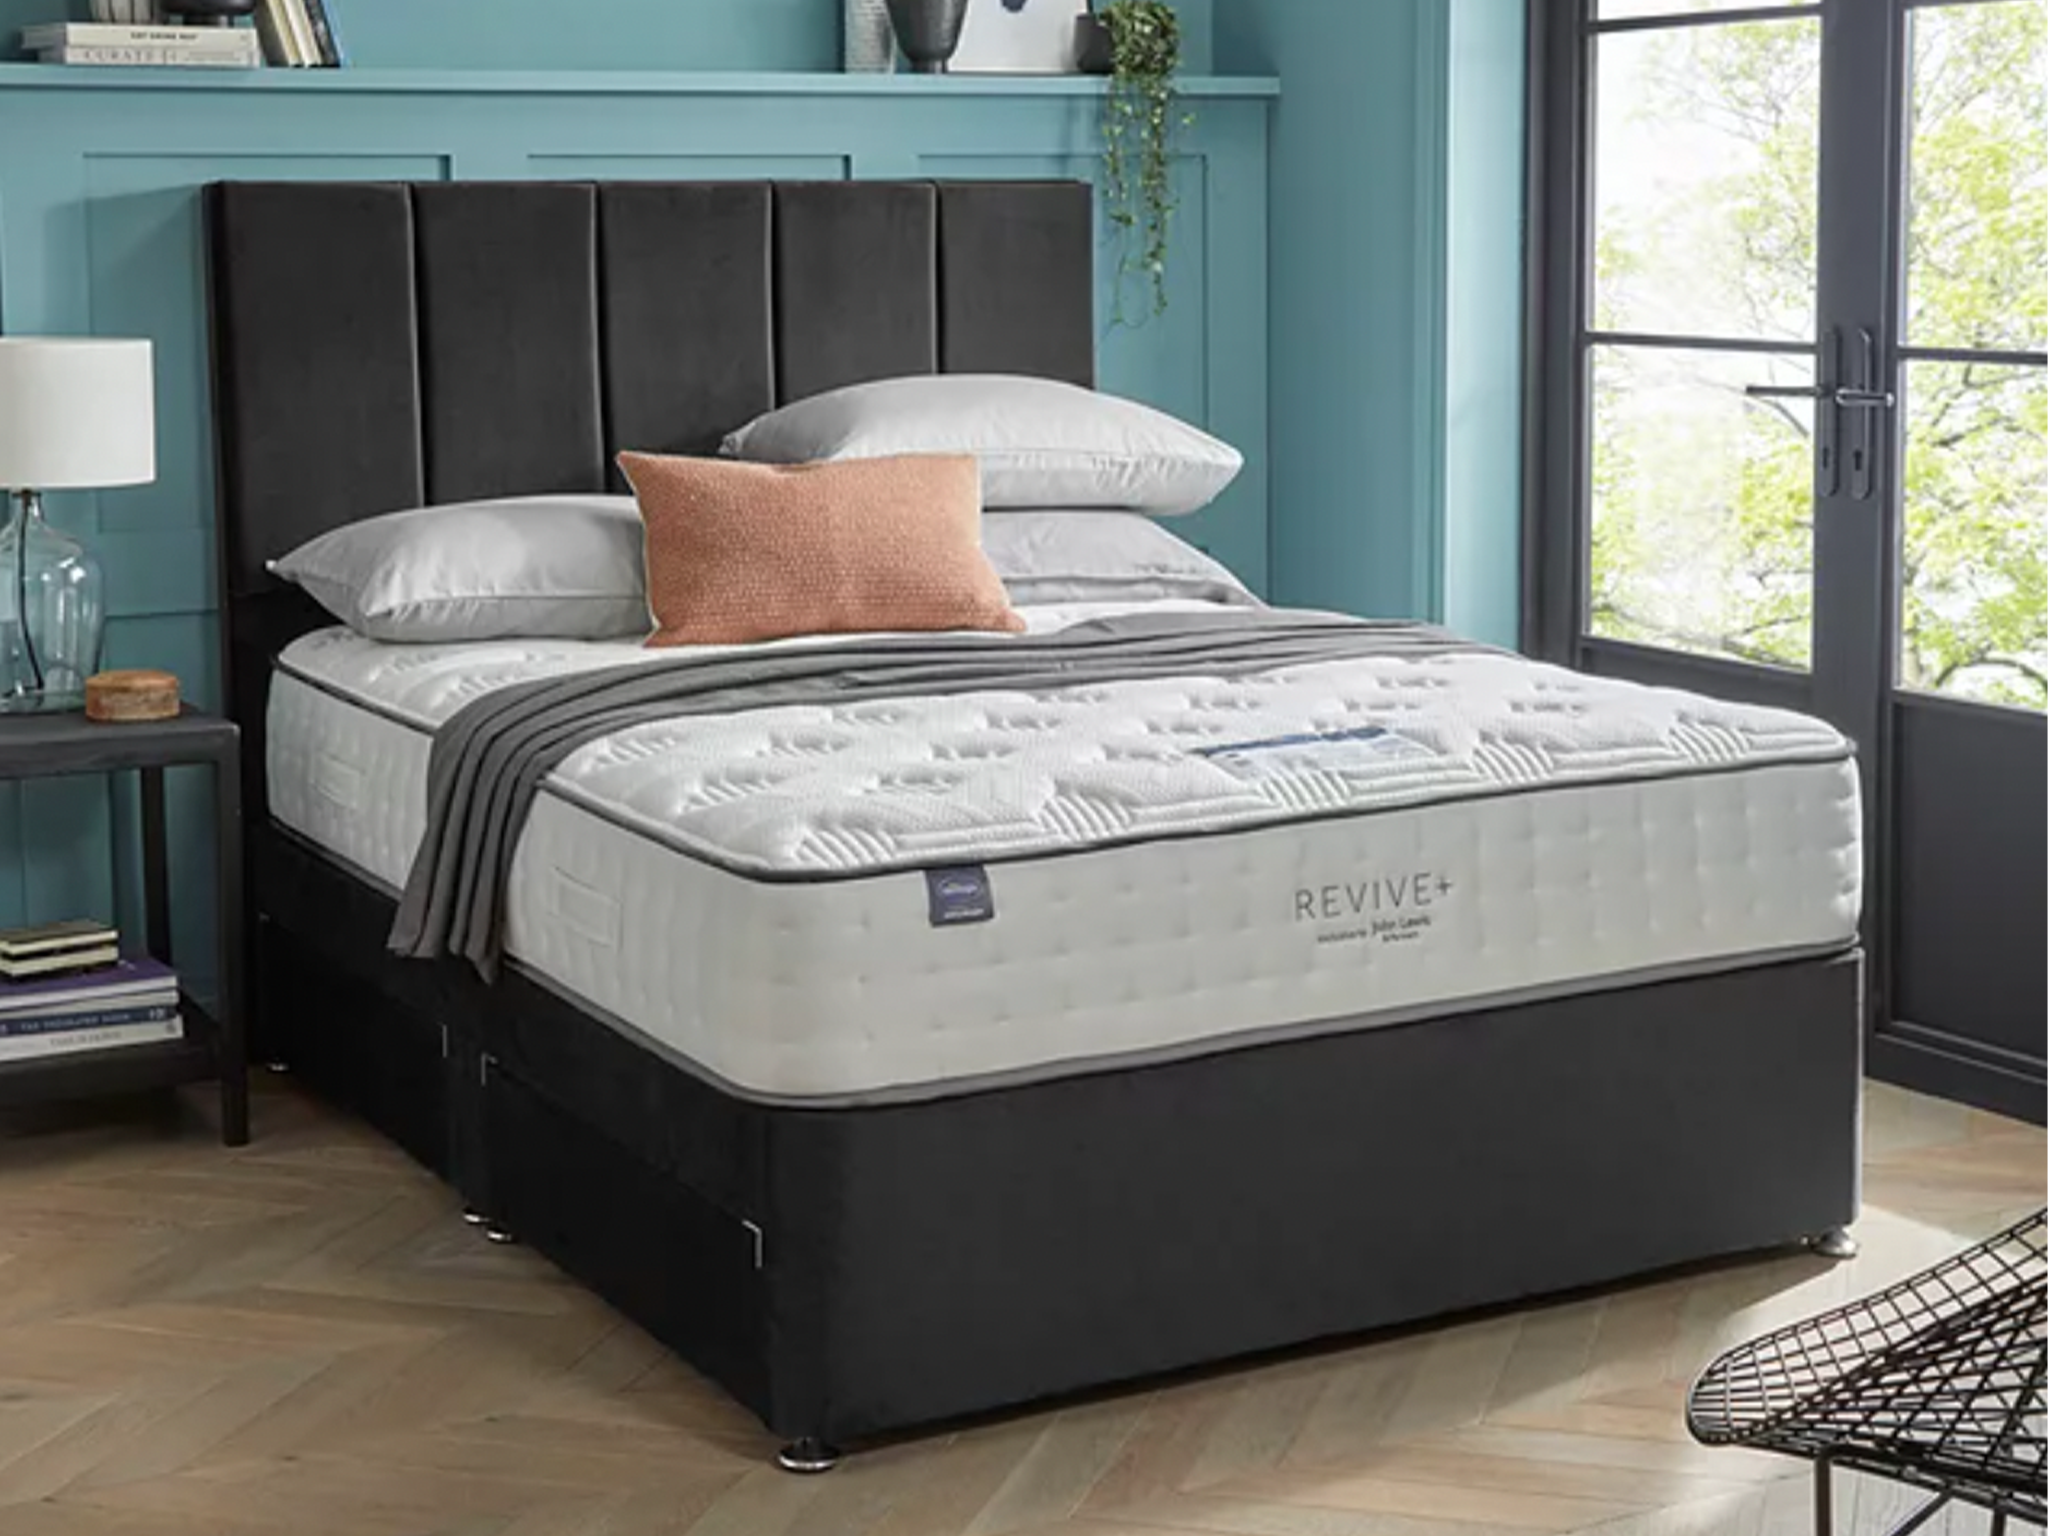 black friday, indybest, mattresses, amazon, black friday, best cyber monday mattress deals 2023: get up to 65% off in the simba and emma sales